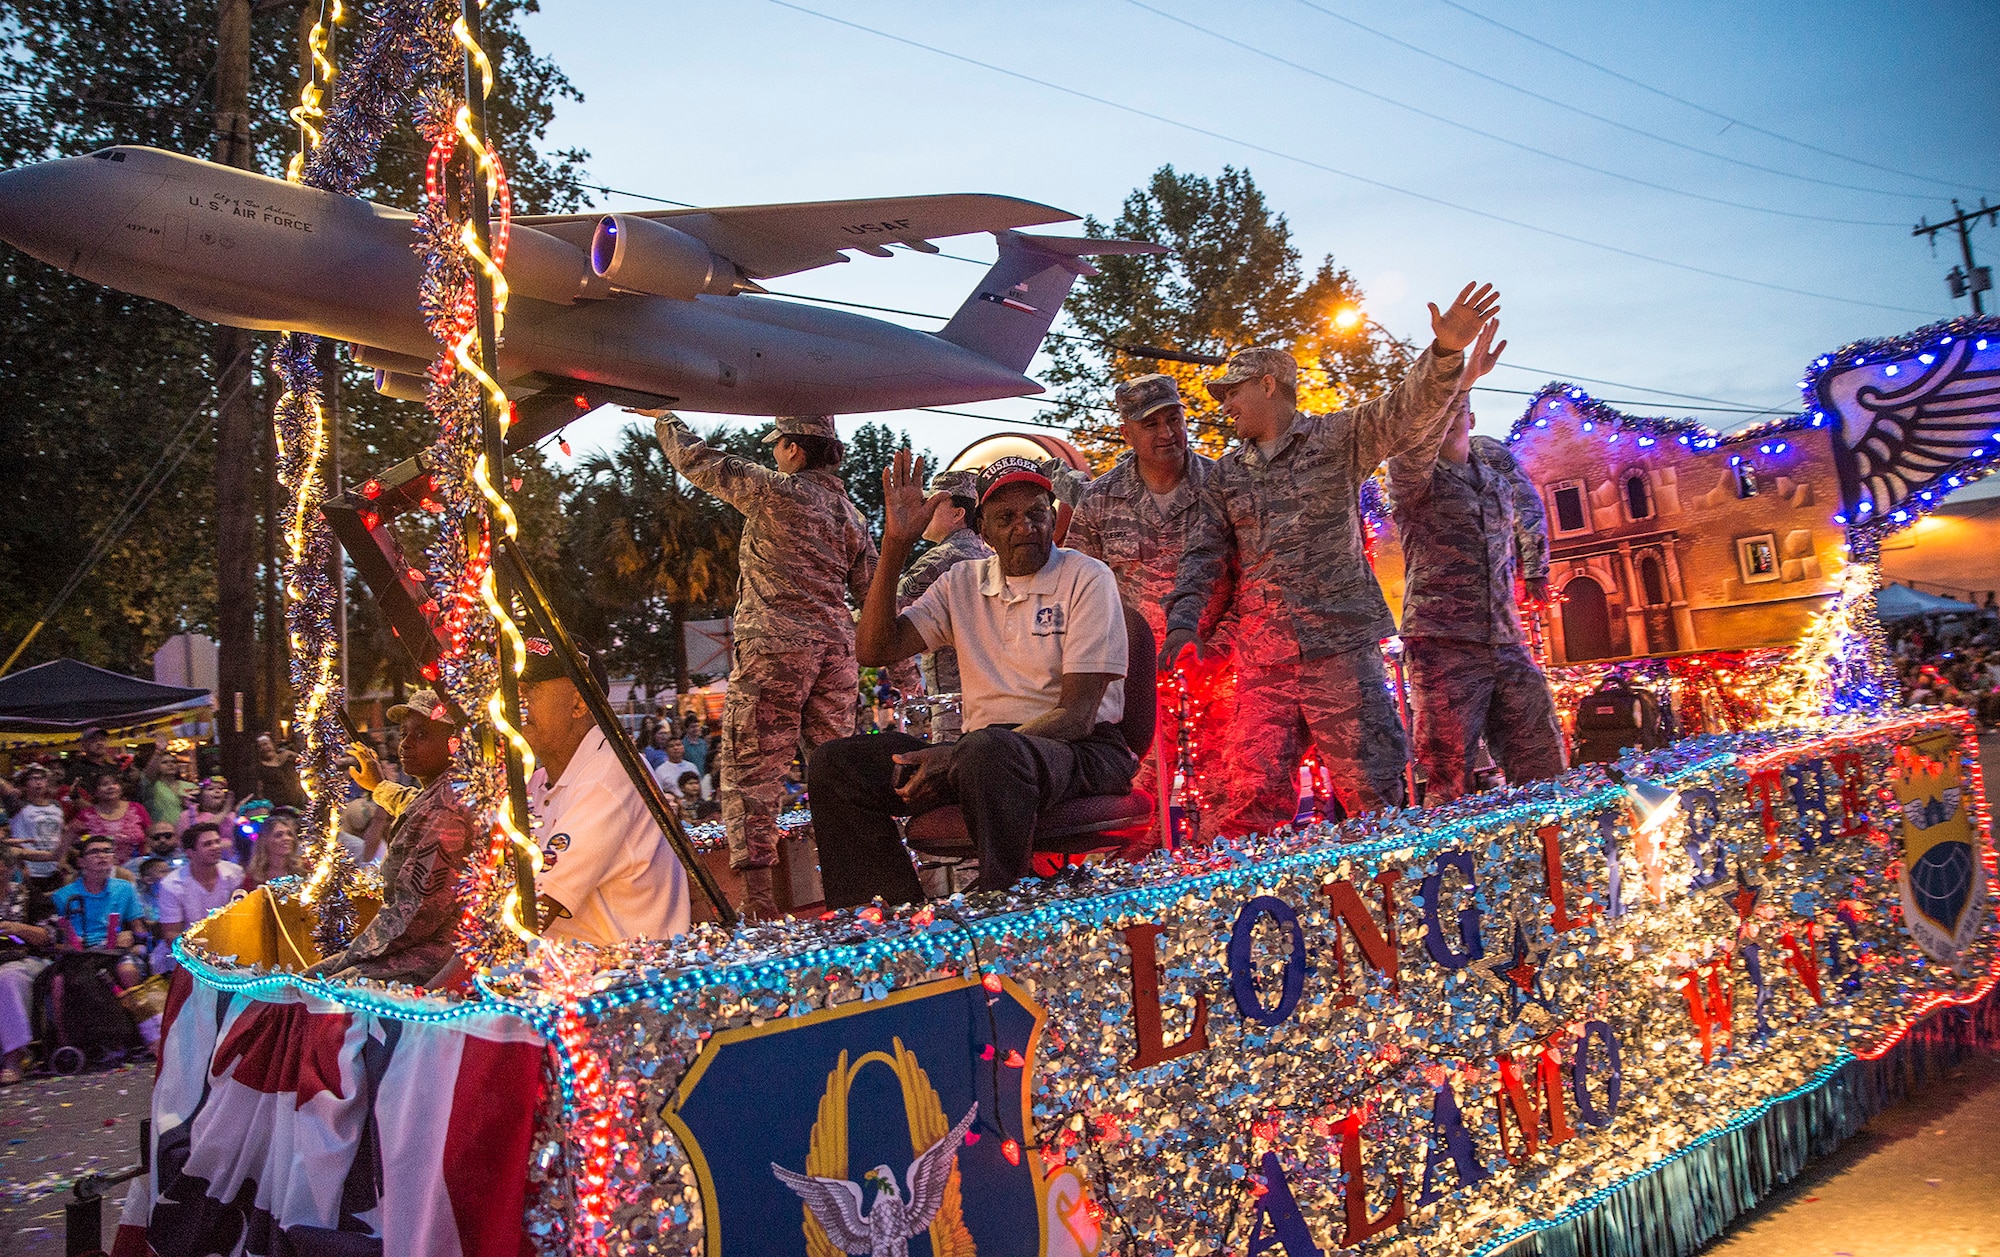 Theodore Johnson, a documented original Tuskegee Airman and San Antonio resident, waves to the crowd while riding on the 433rd Airlift Wing float during the Fiesta Flambeau parade April 23, 2016. (U.S. Air Force photo by Benjamin Faske) (released)